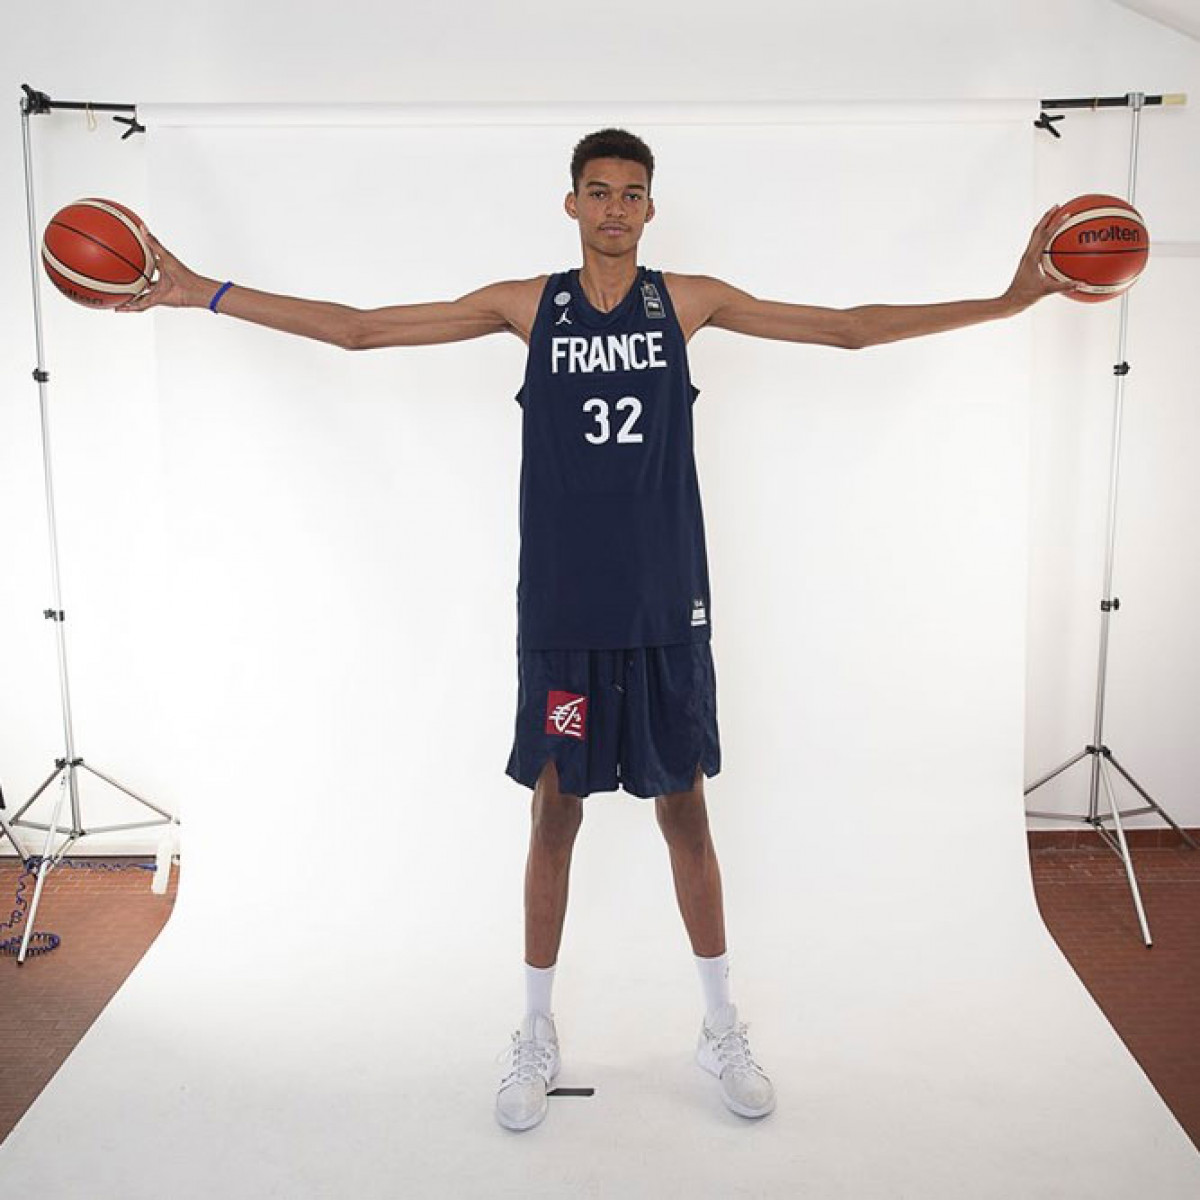 French NBA prospect 7'3